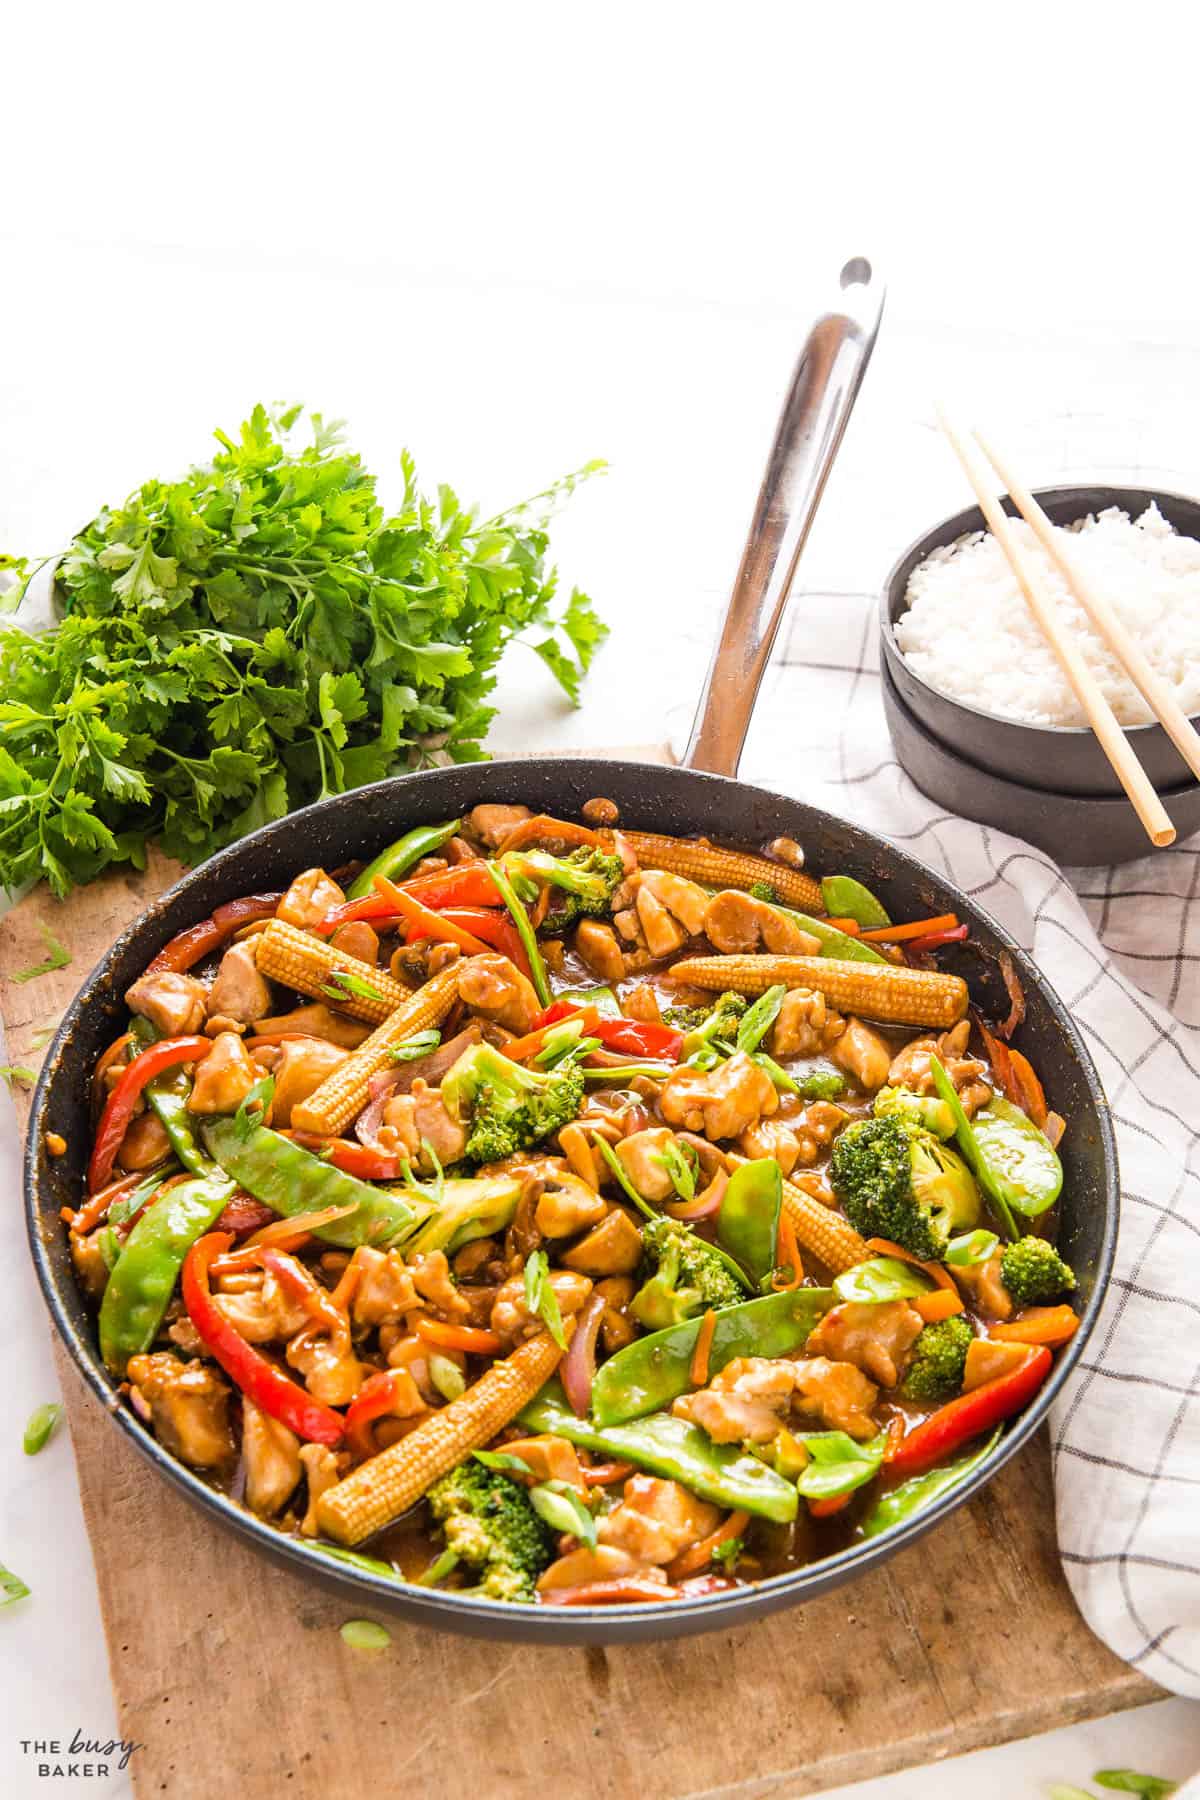 chicken stir fry in pan with veggies and sauce